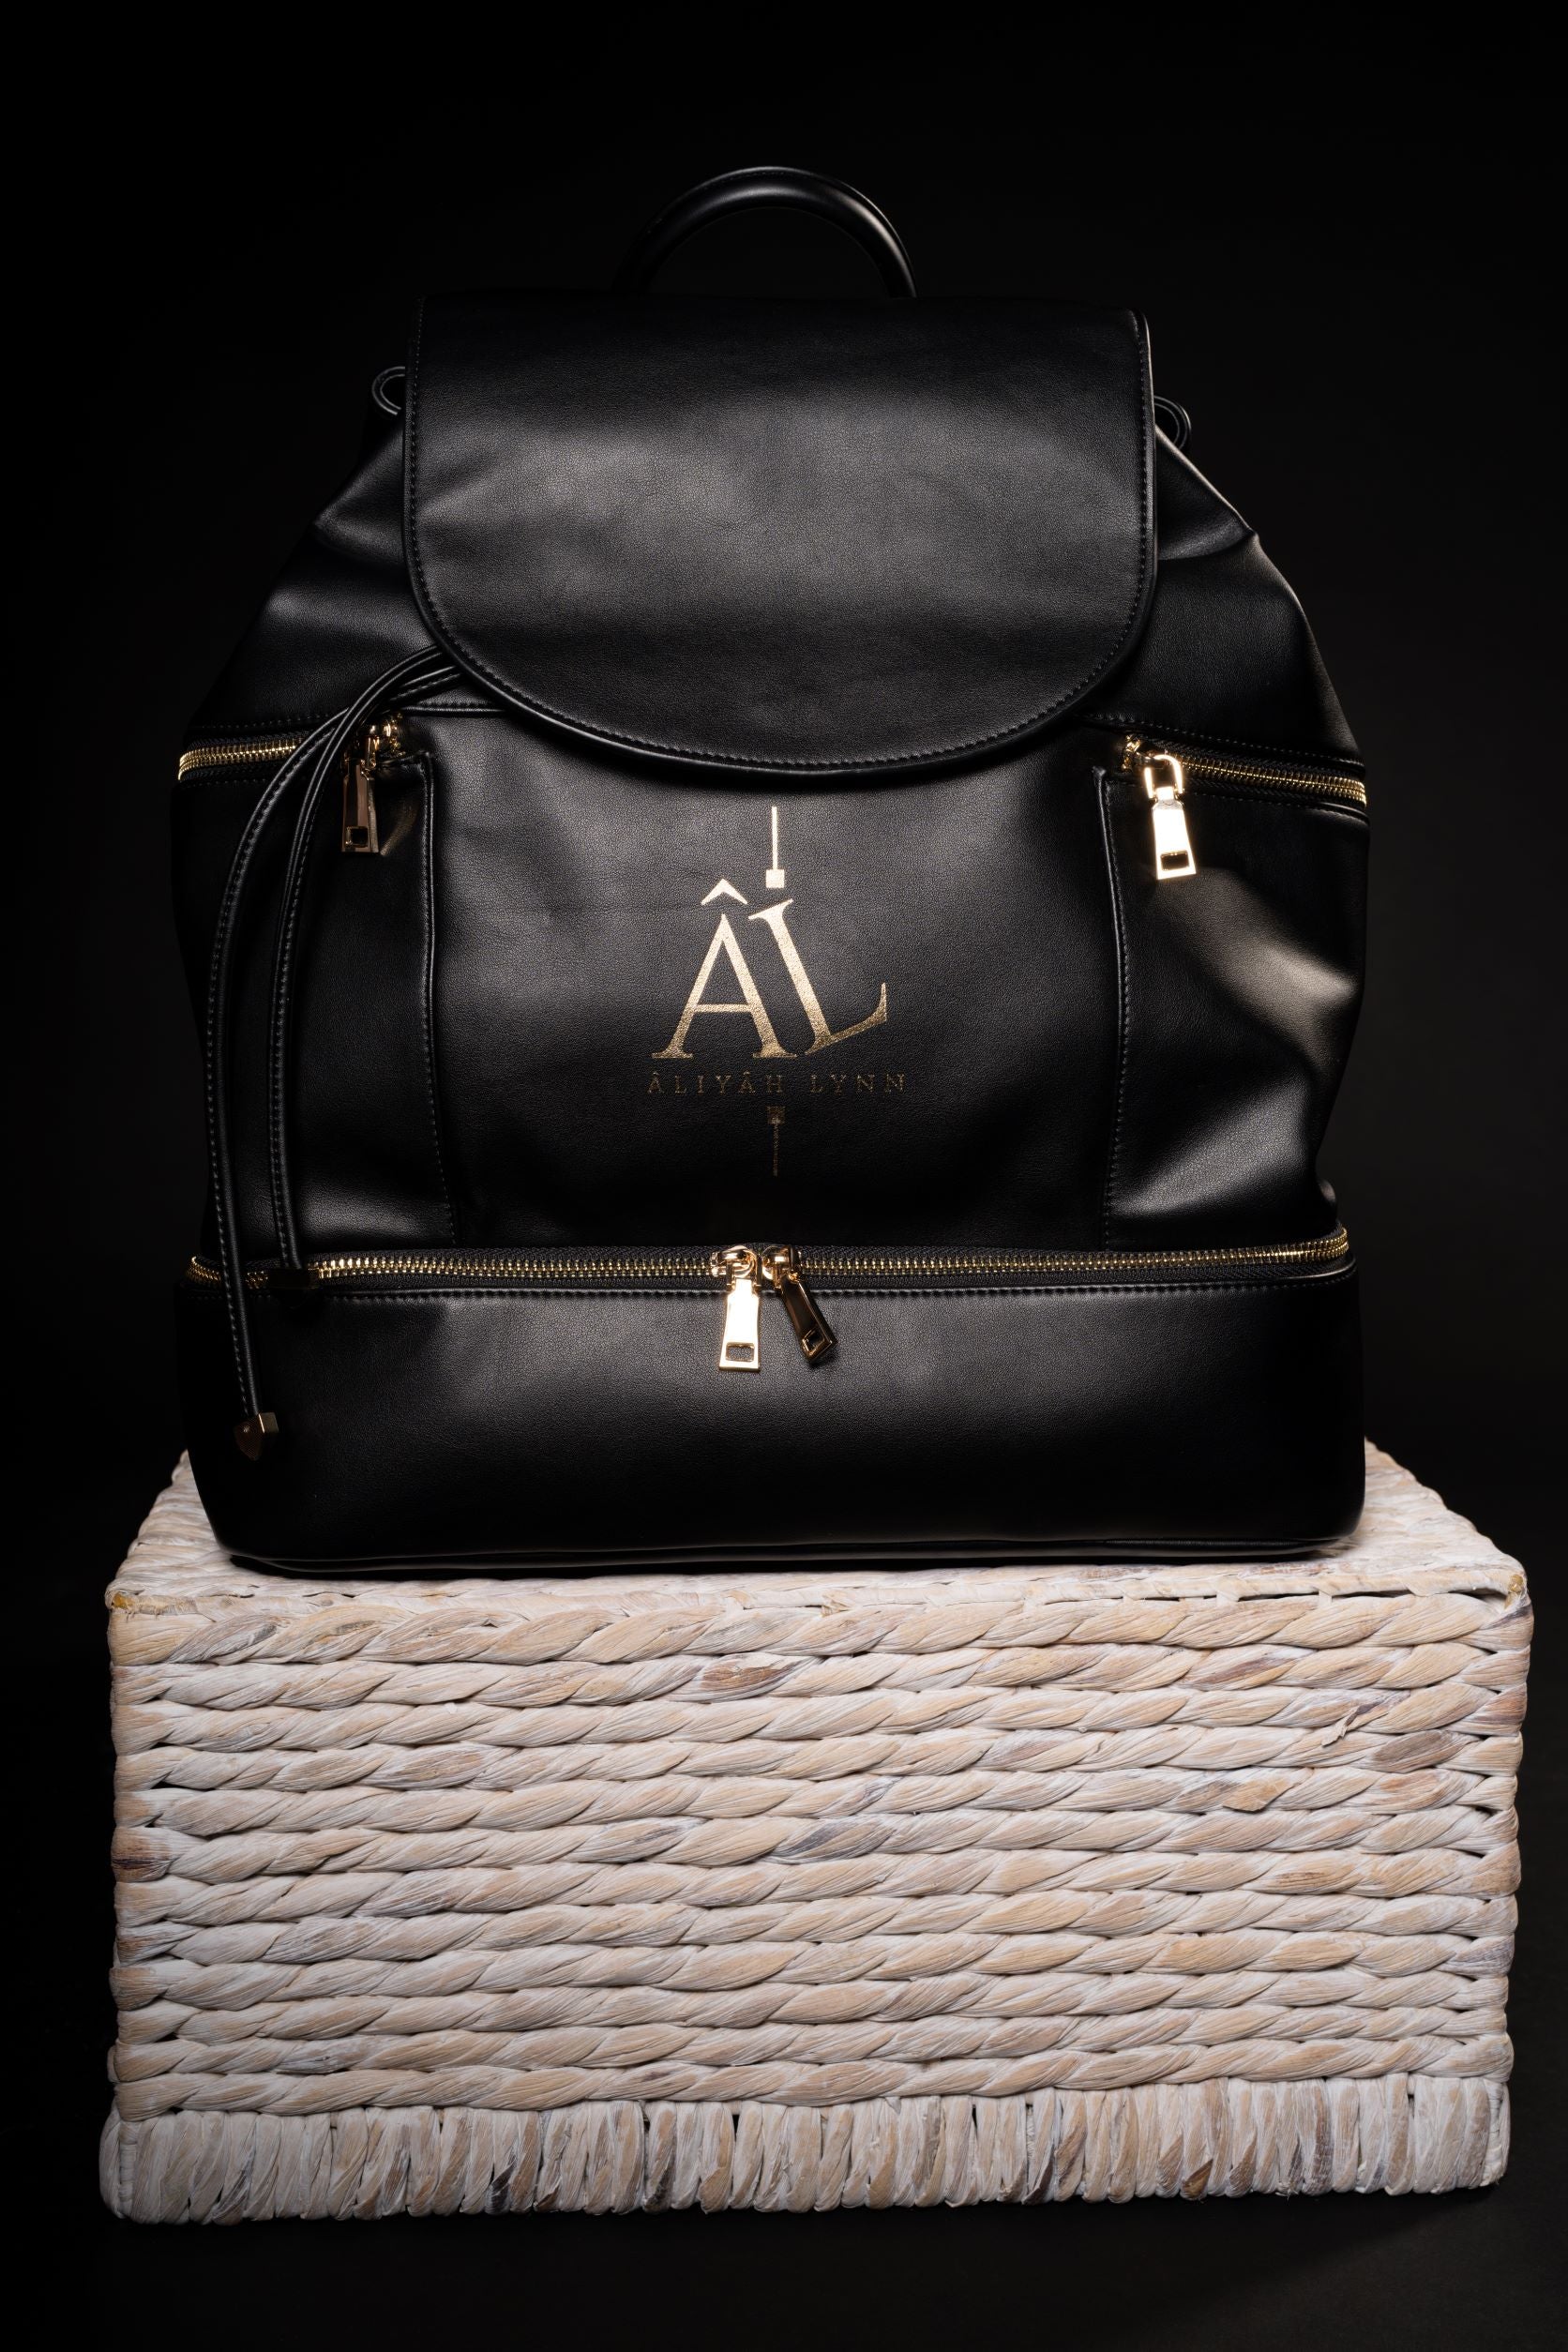 Bags - Ashwood Leather Backpack - Ballantynes Department Store